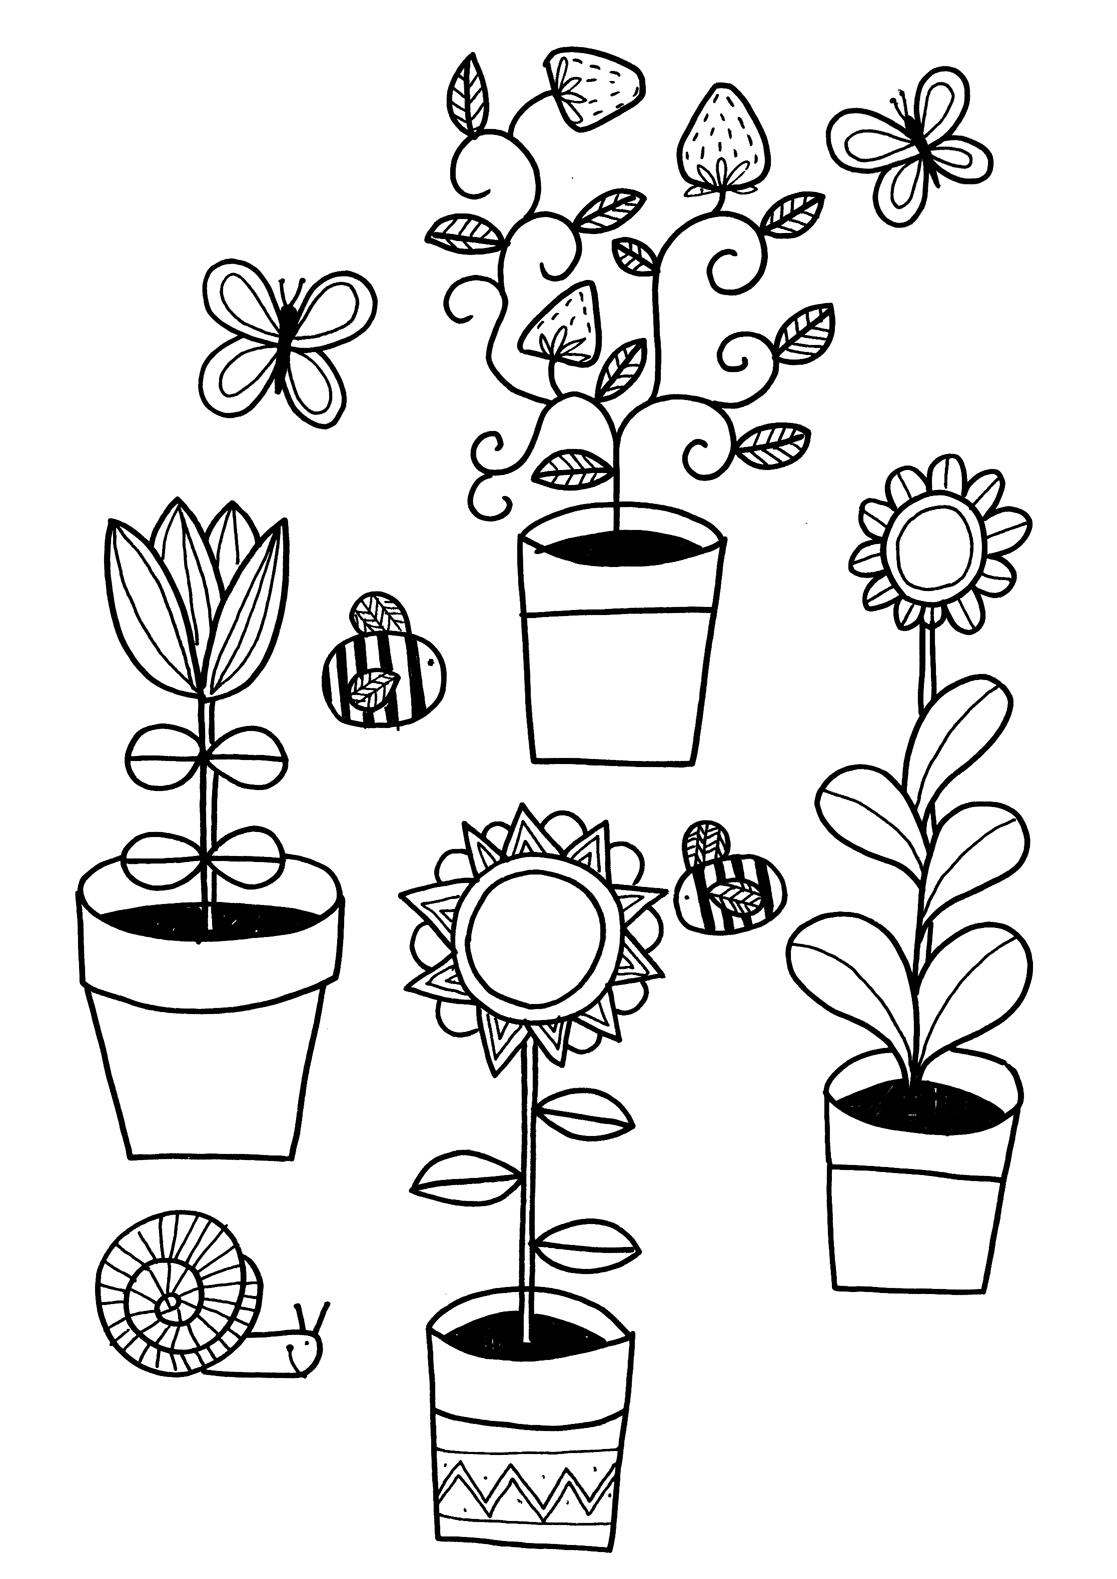 plant-needs-coloring-coloring-page-coloring-pages